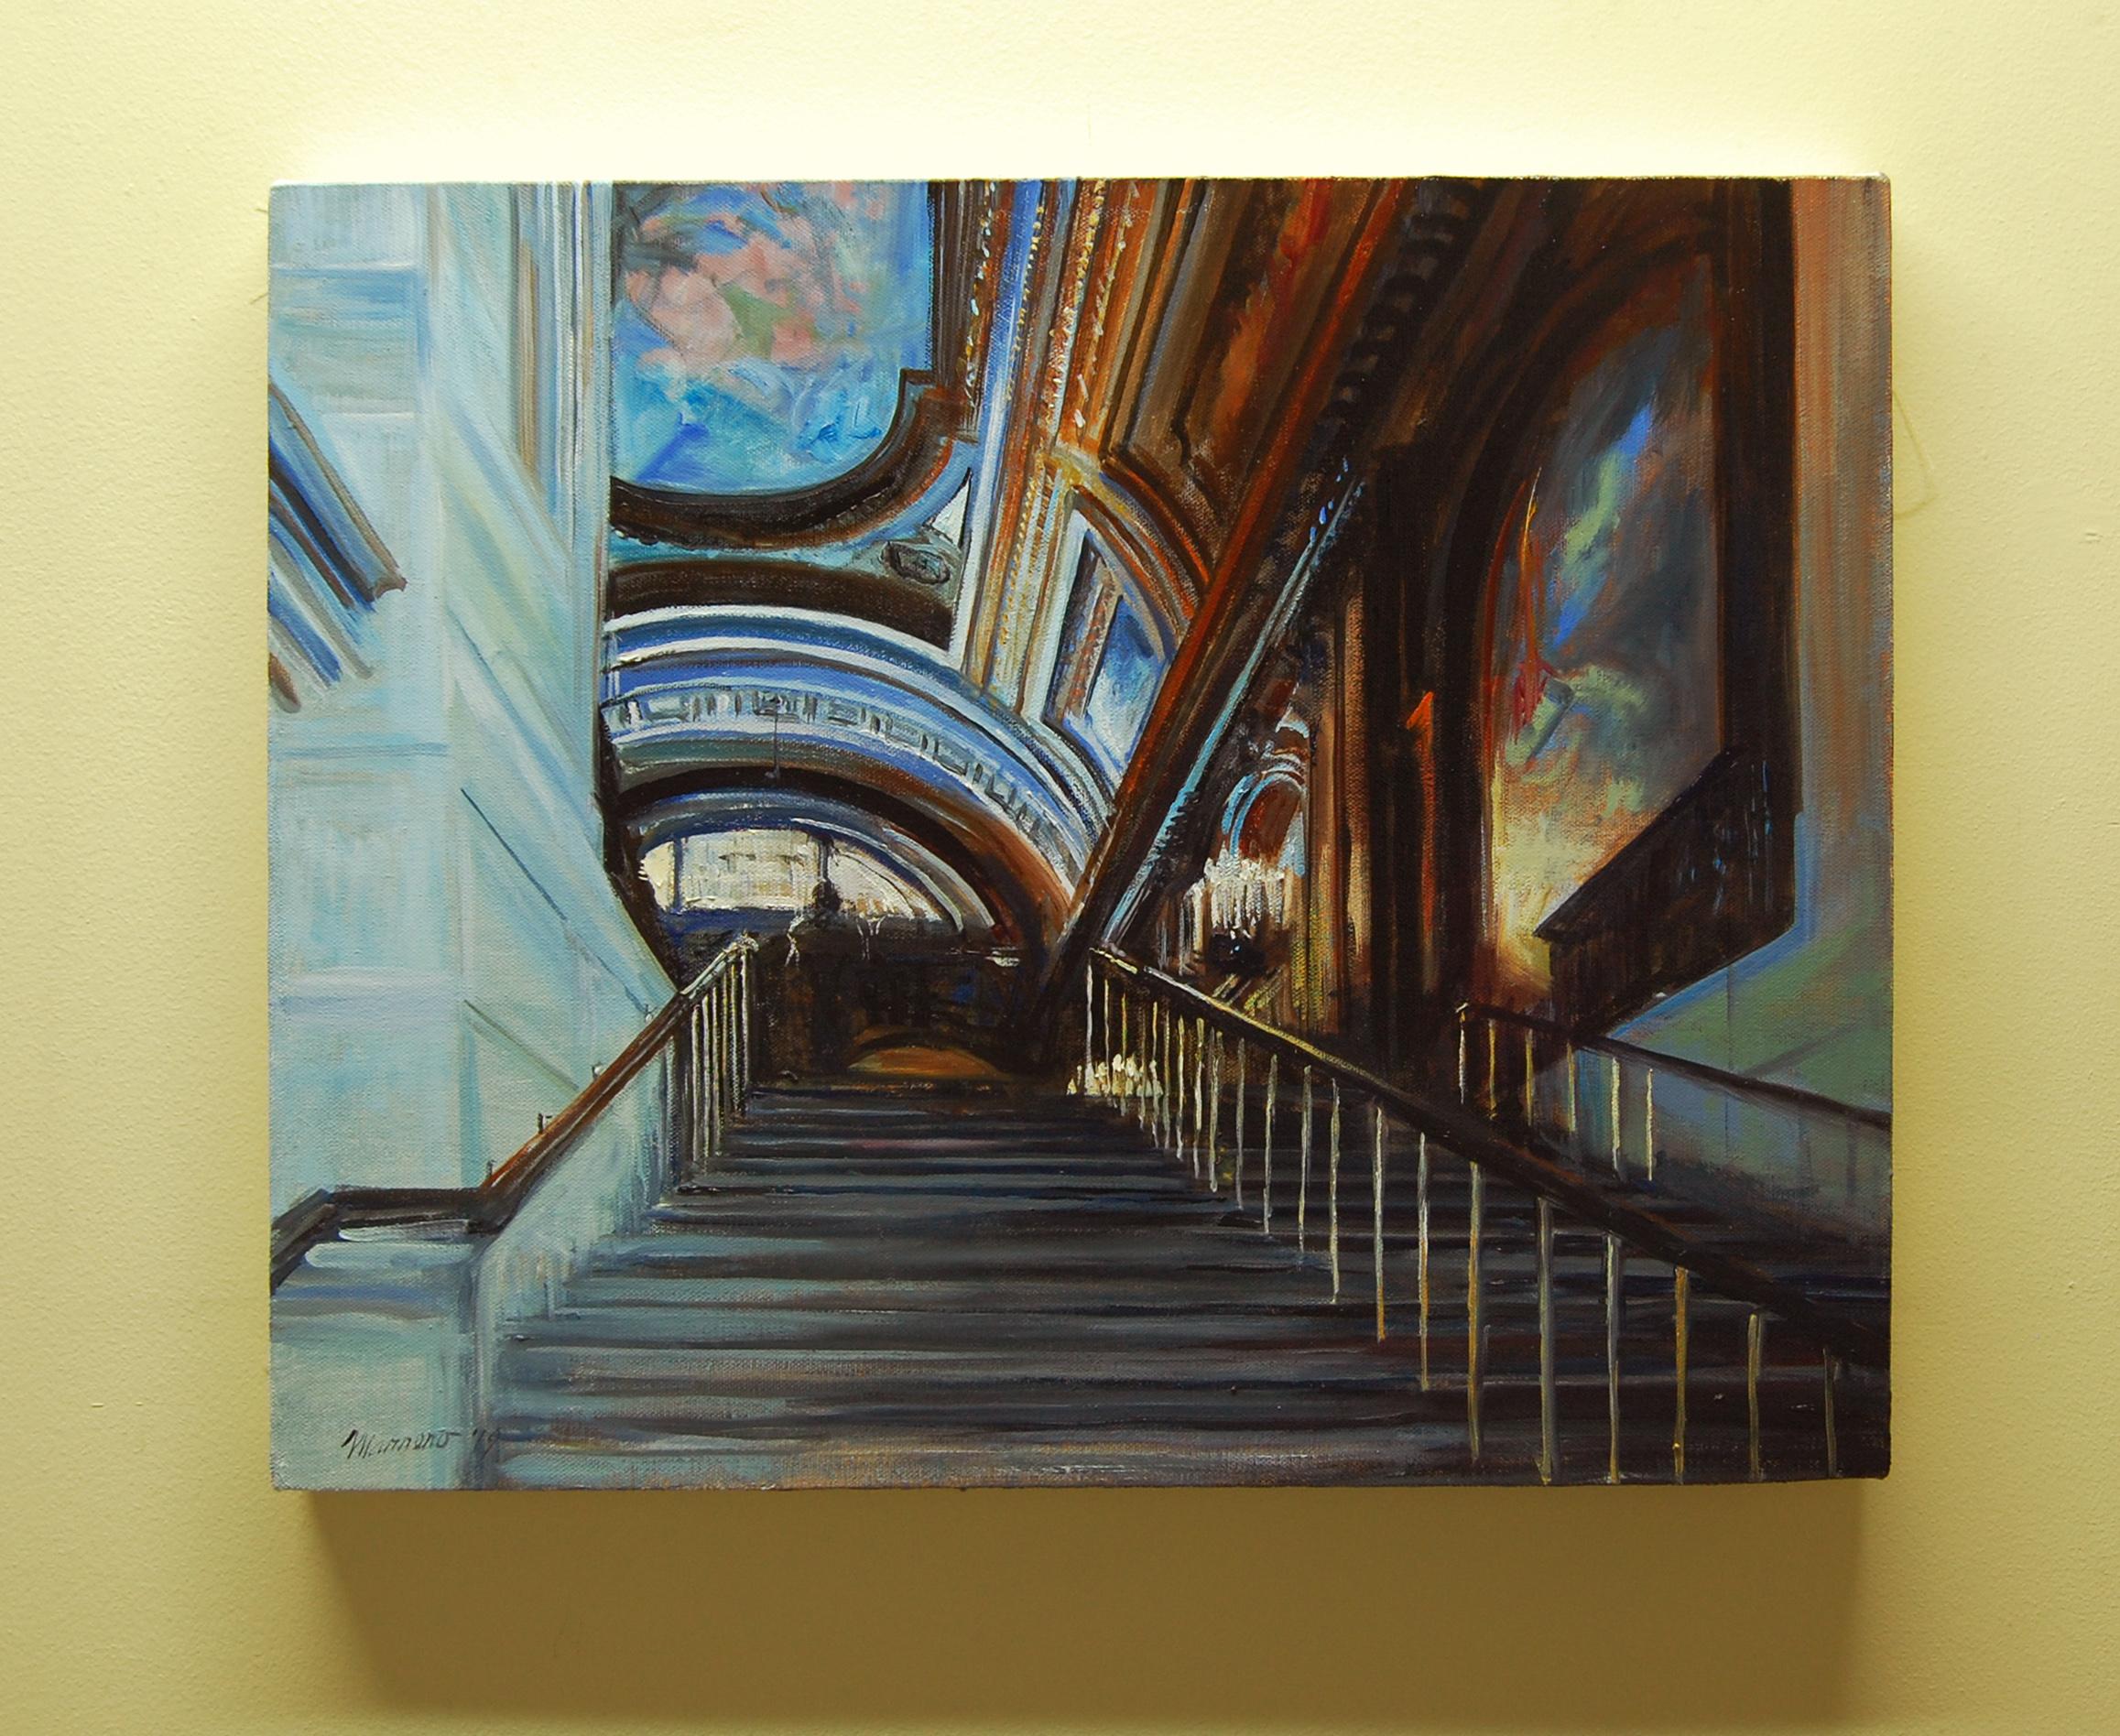 Stairway to a New Journey - Abstract Impressionist Painting by Onelio Marrero